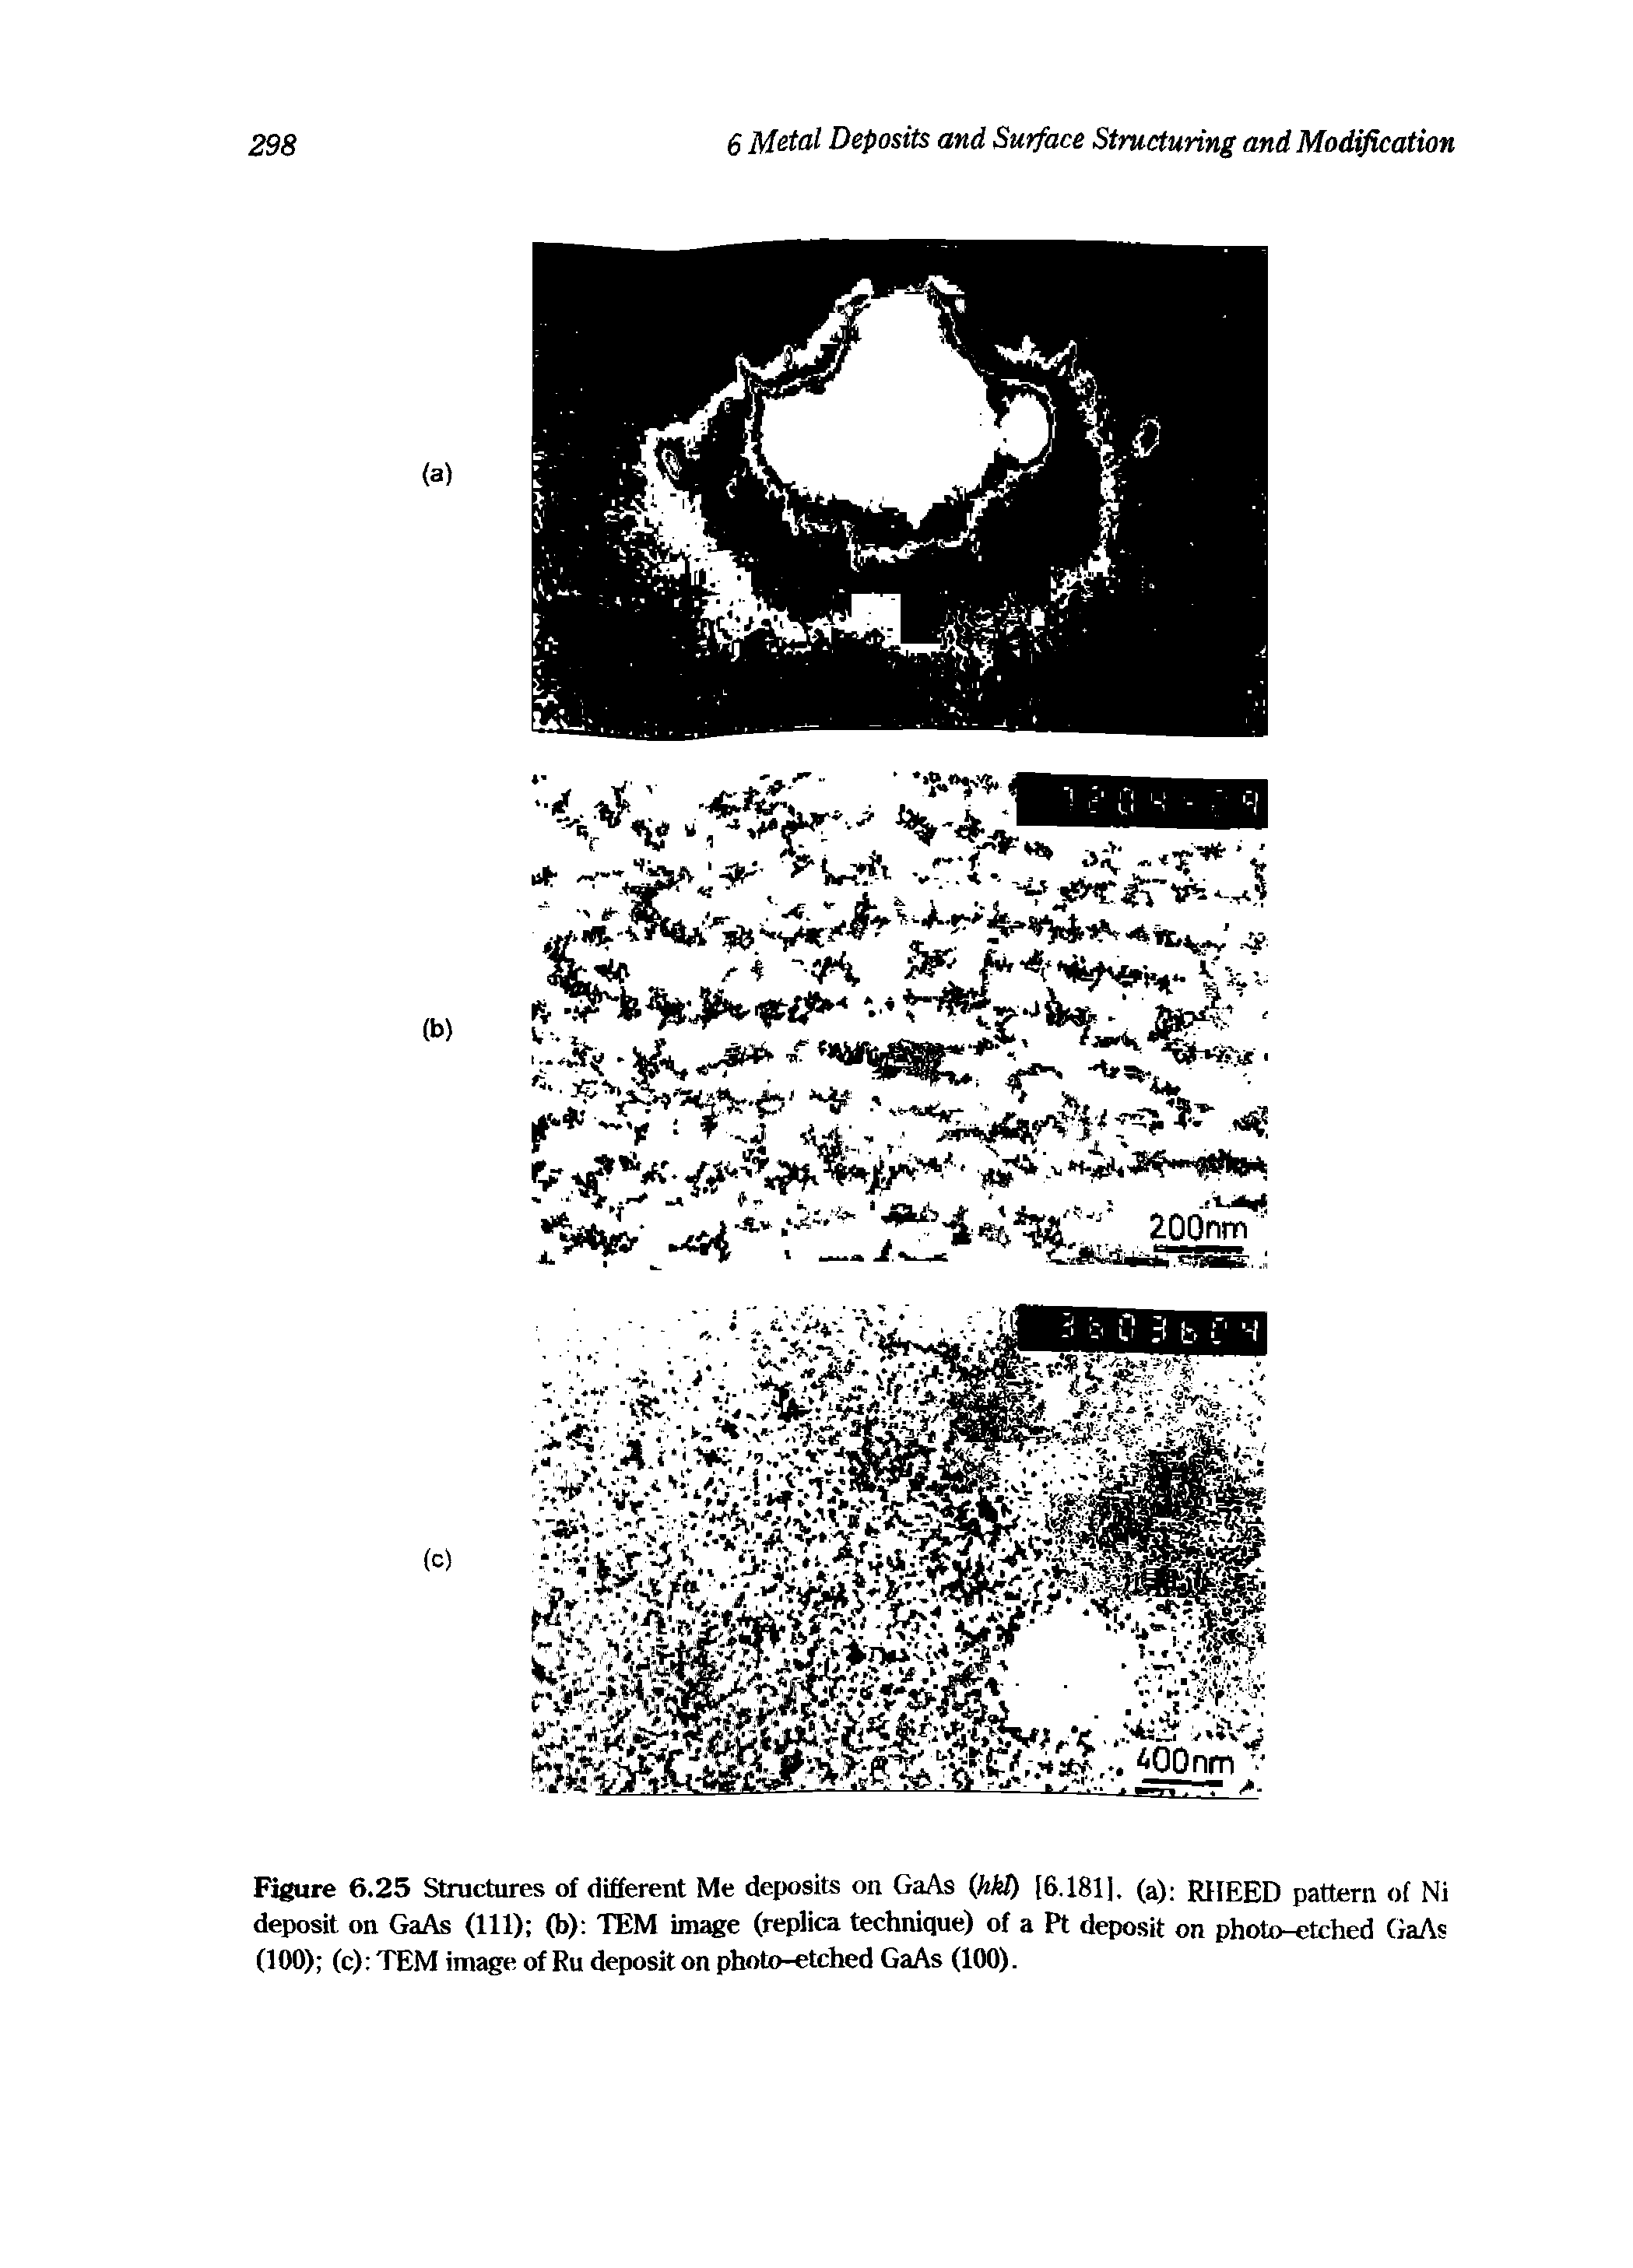 Figure 6.25 Structures of different Me deposits on GaAs (hk ) [6.181], (a) RHEED pattern of Ni deposit on GaAs (111) (b) TEM image (replica technique) of a Pt deposit on photo-etched GaAs (100) (c) TEM image of Ru deposit on photo-etched GaAs (100).